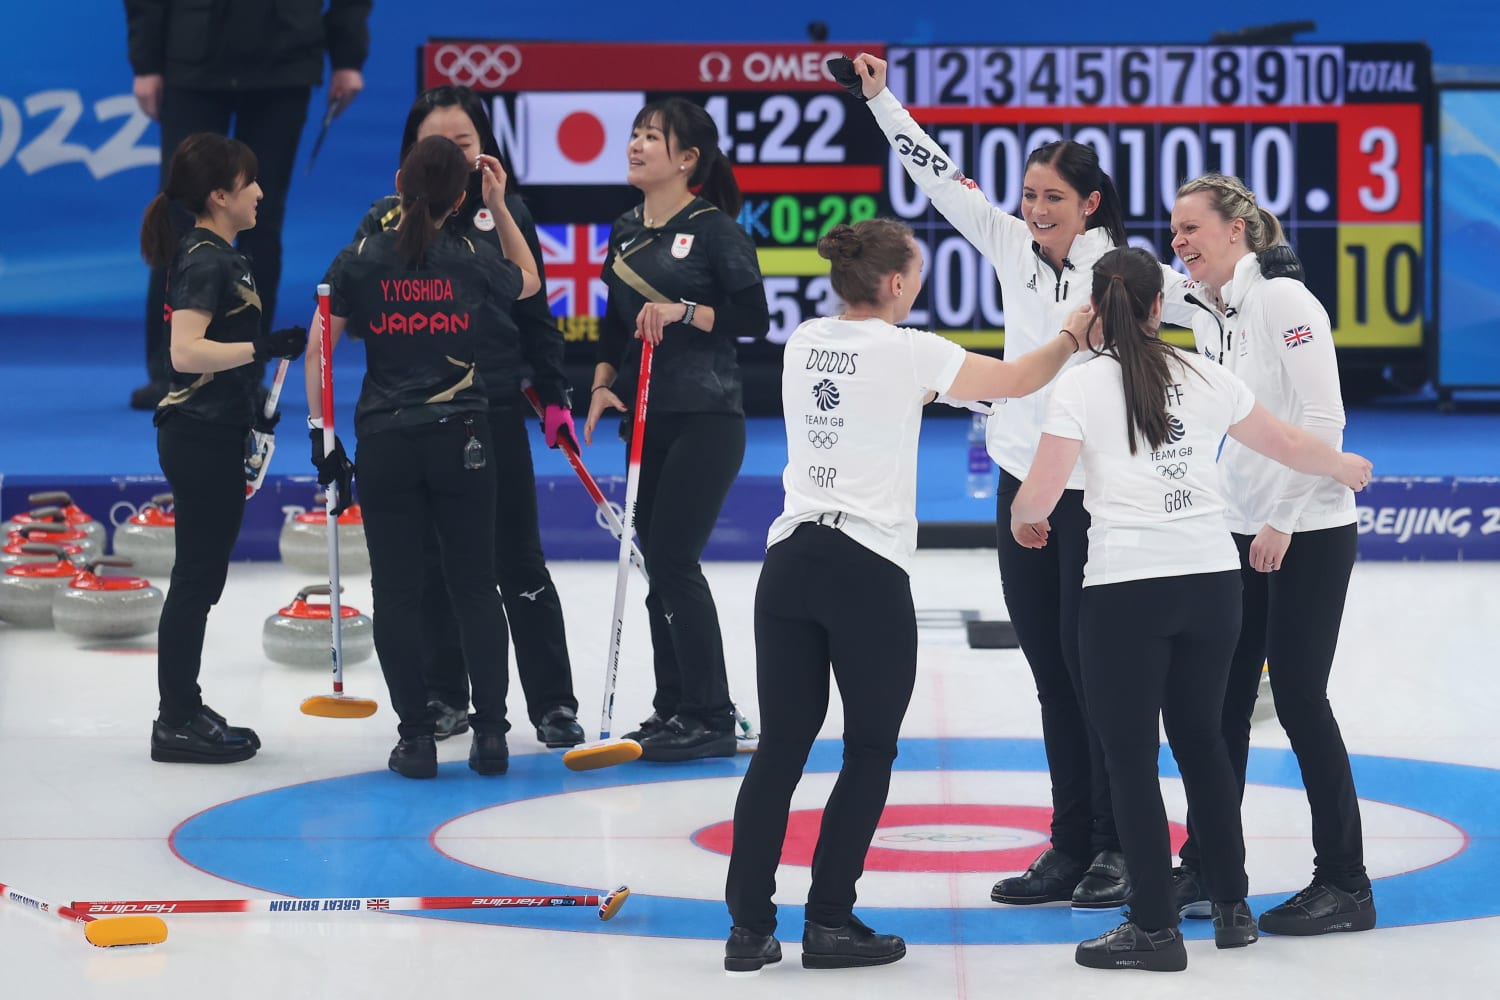 The men's curling team won silver a day earlier. 